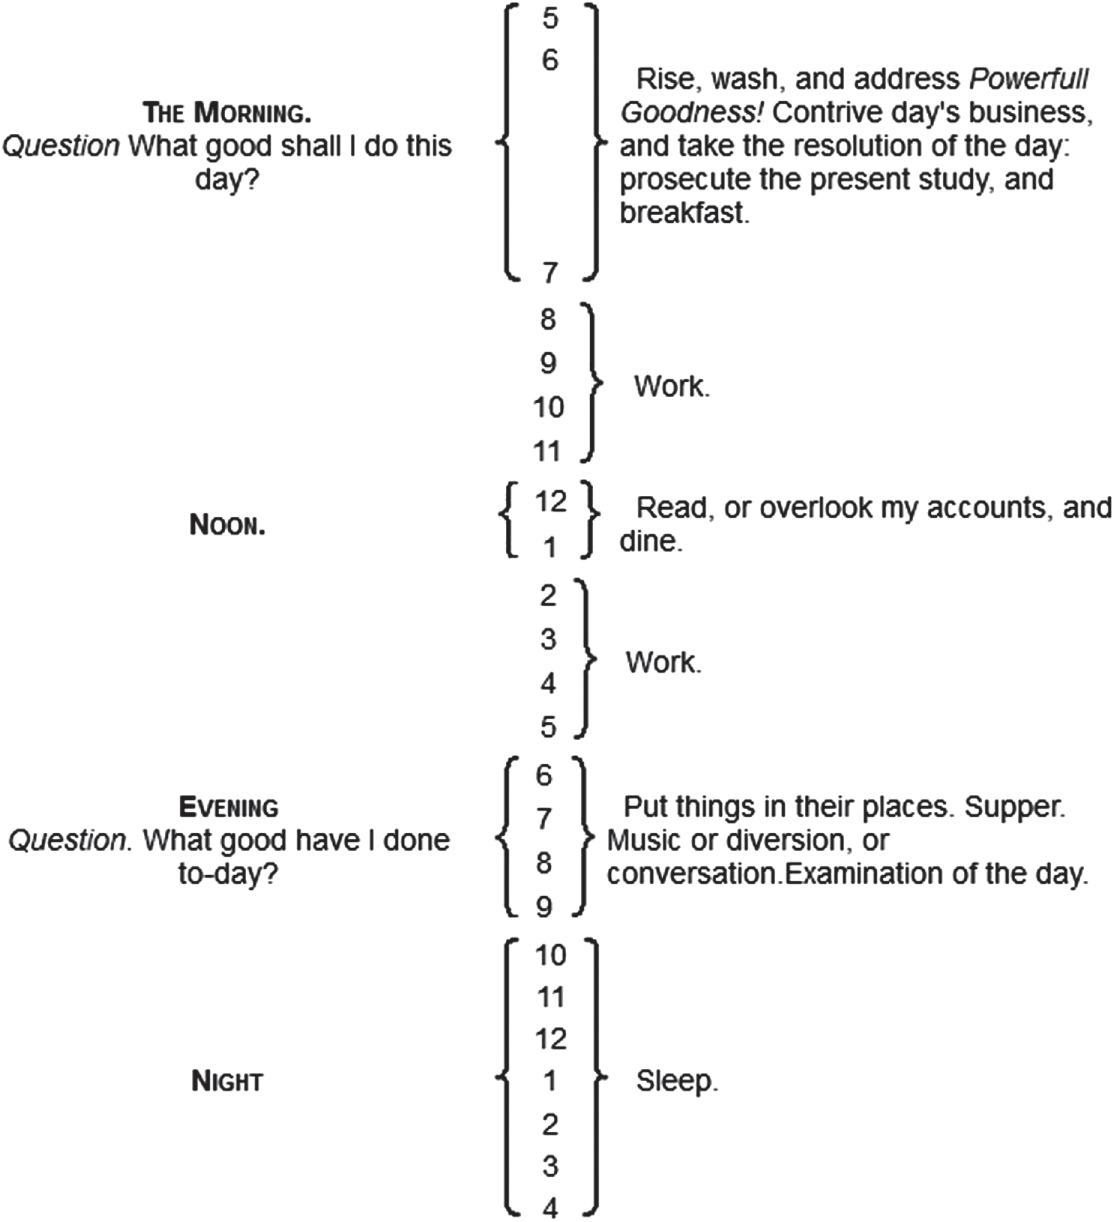 An illustration of regular routines and schedules for writing.